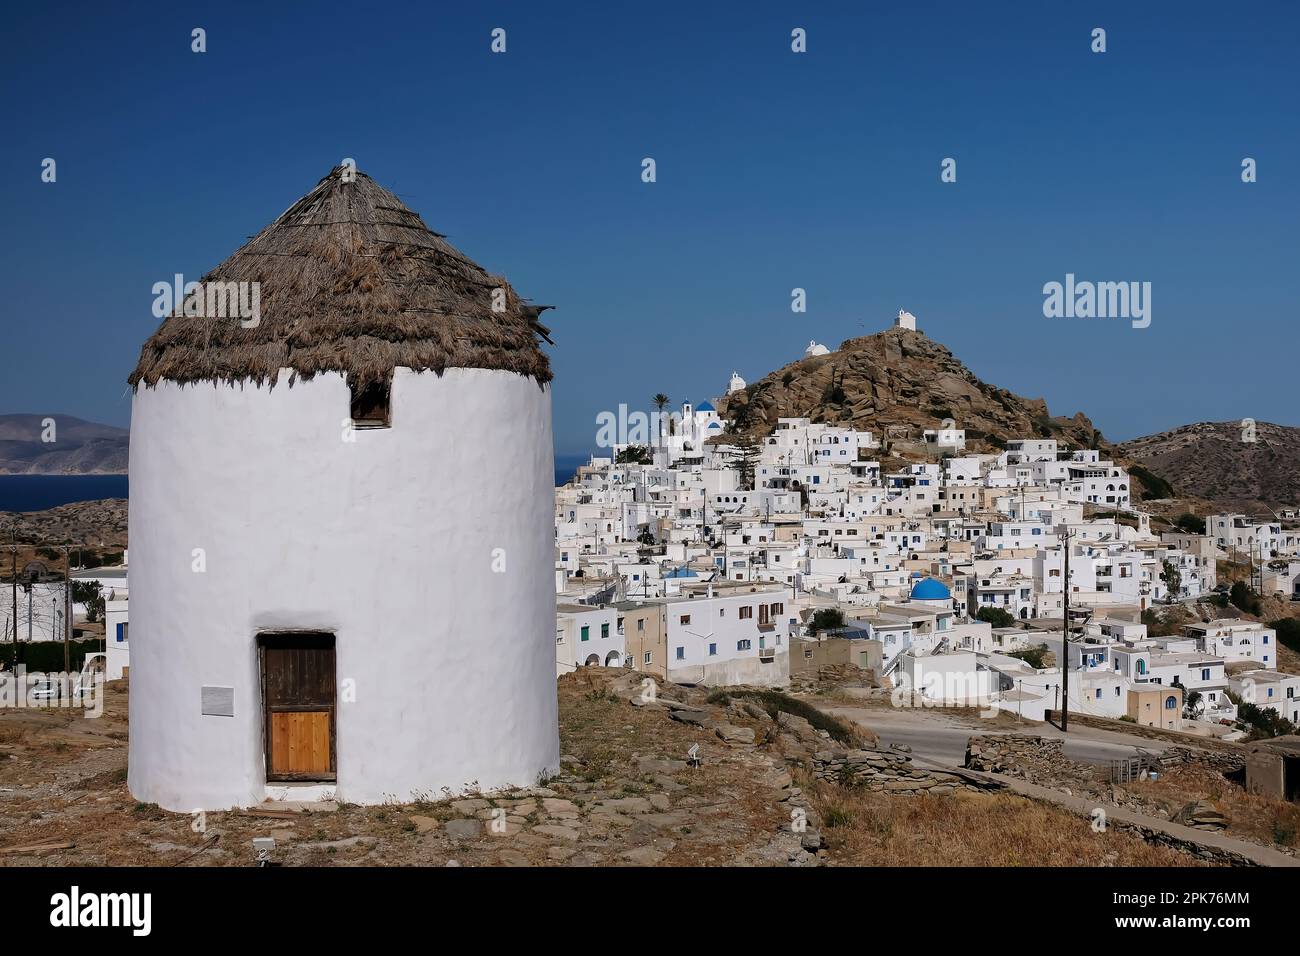 View of a beautiful white windmill and the village of Ios Greece in the backround Stock Photo